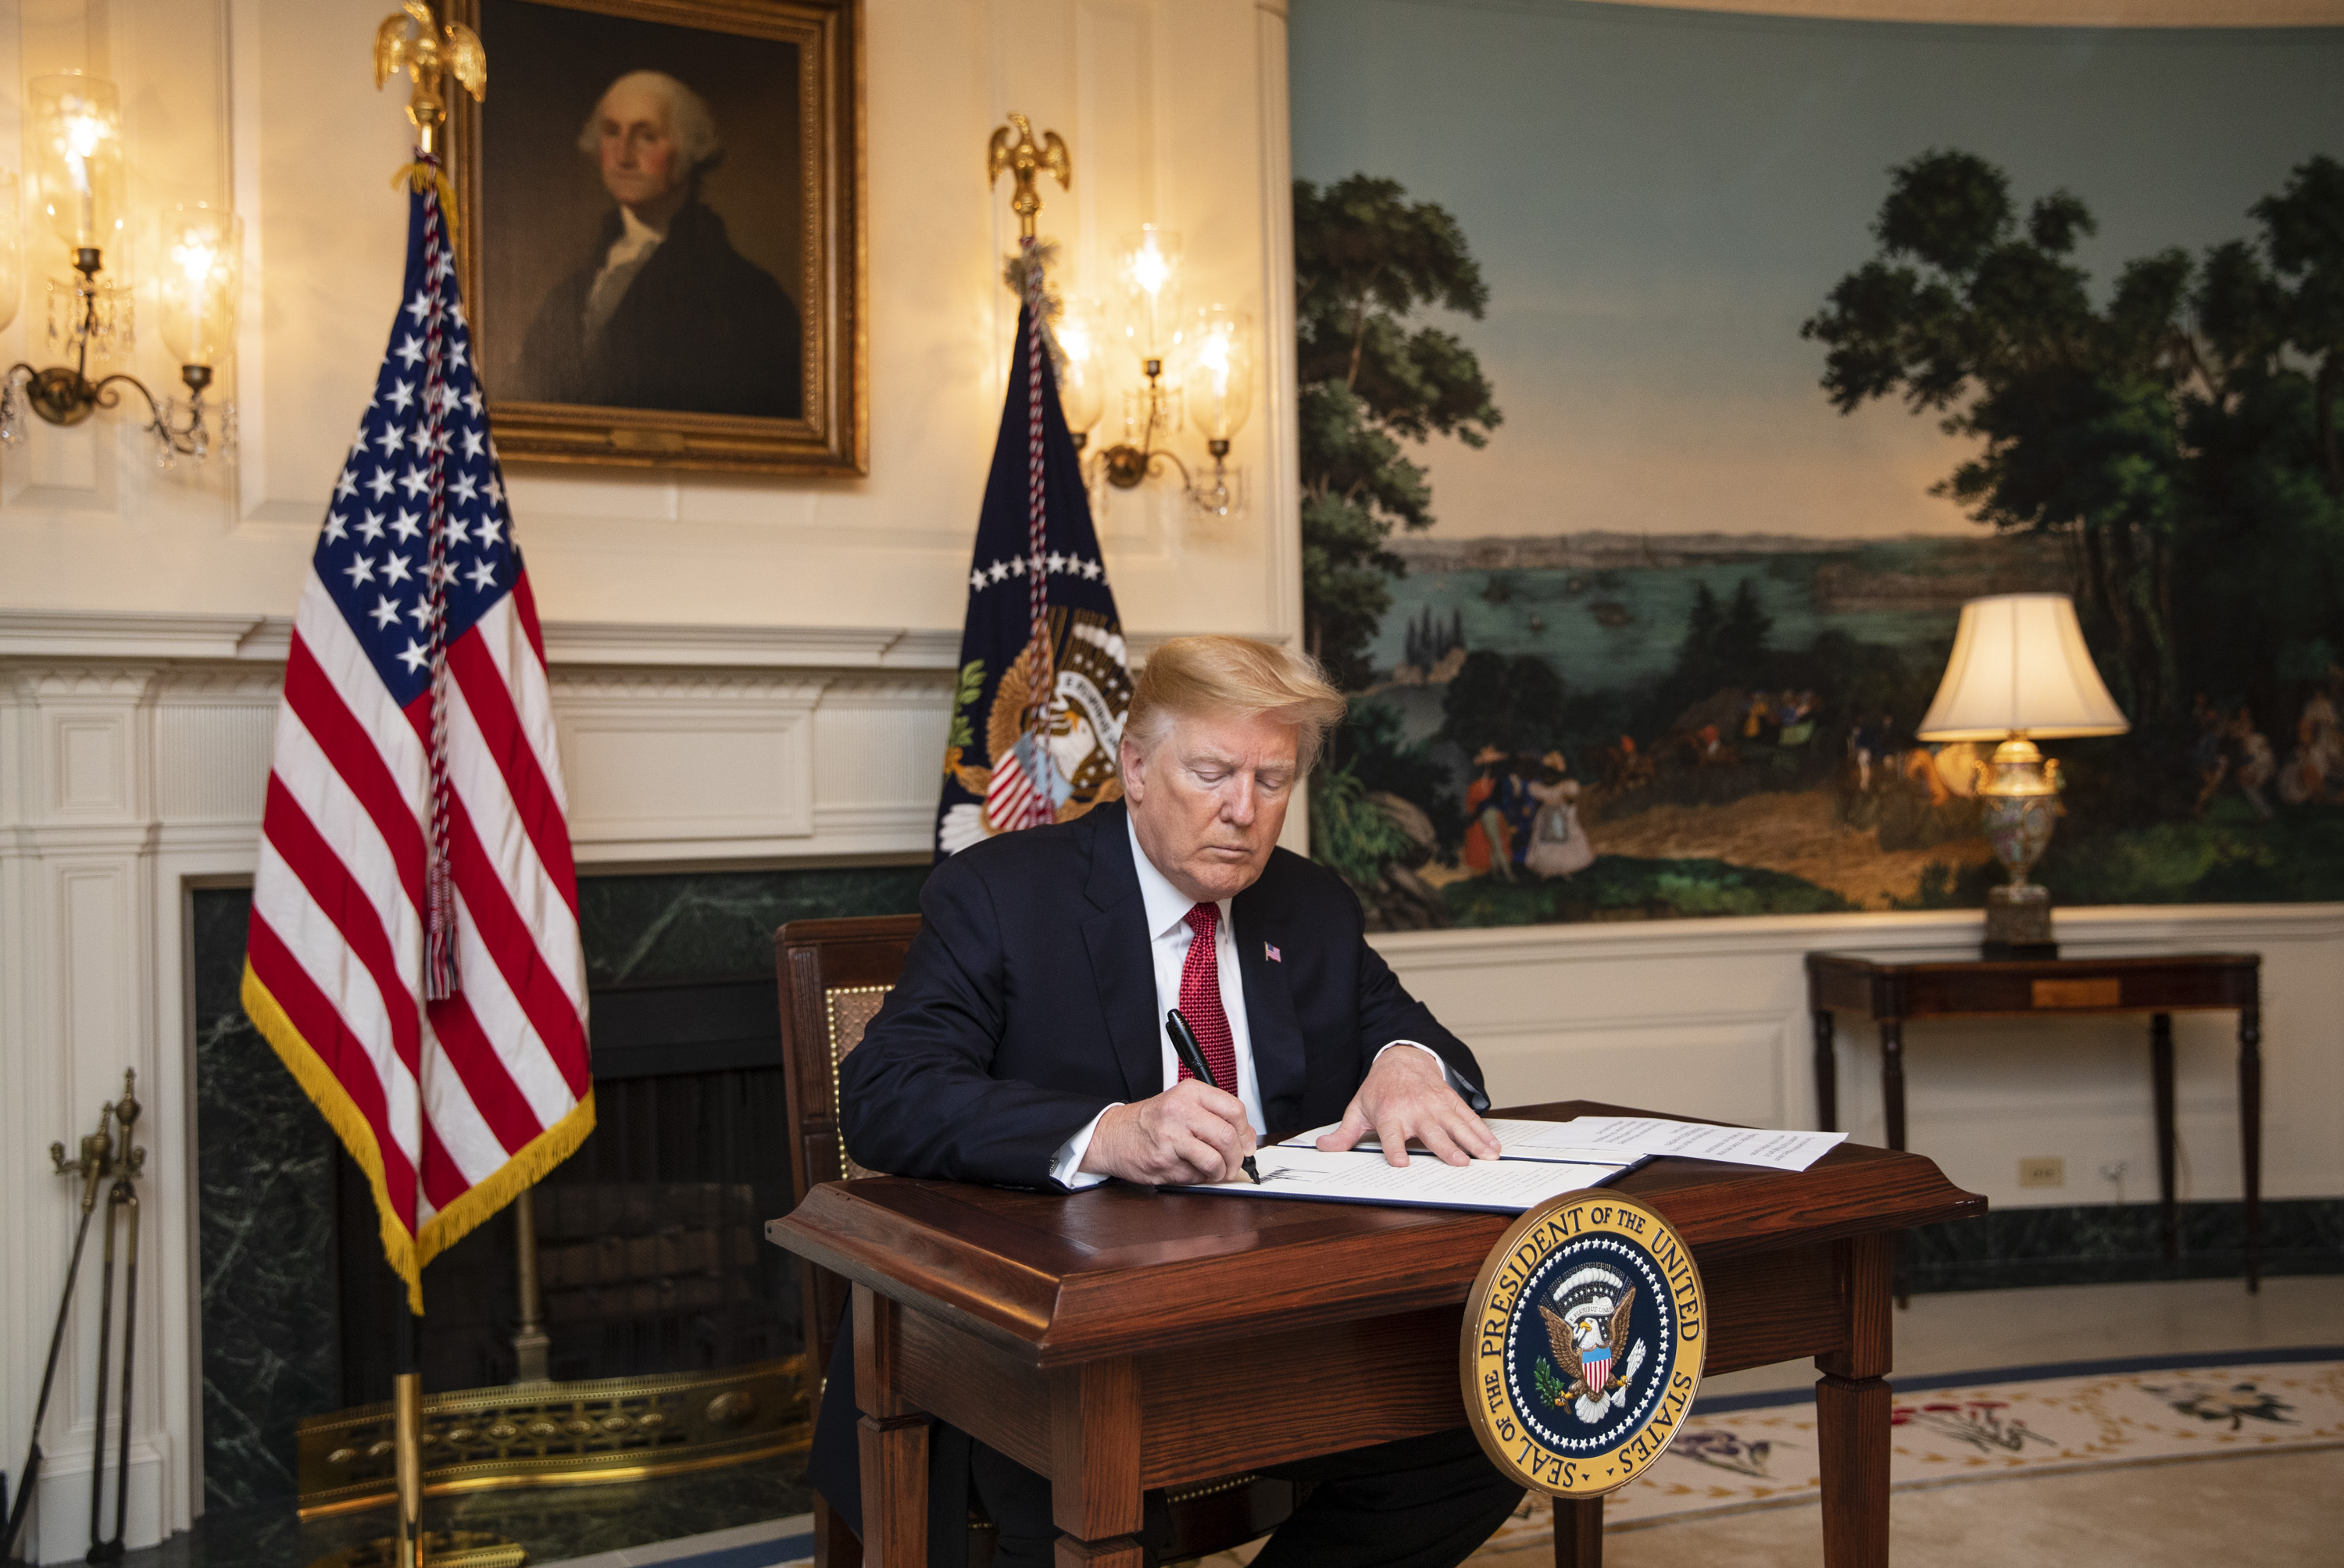 President Trump signs an immigration proclamation.